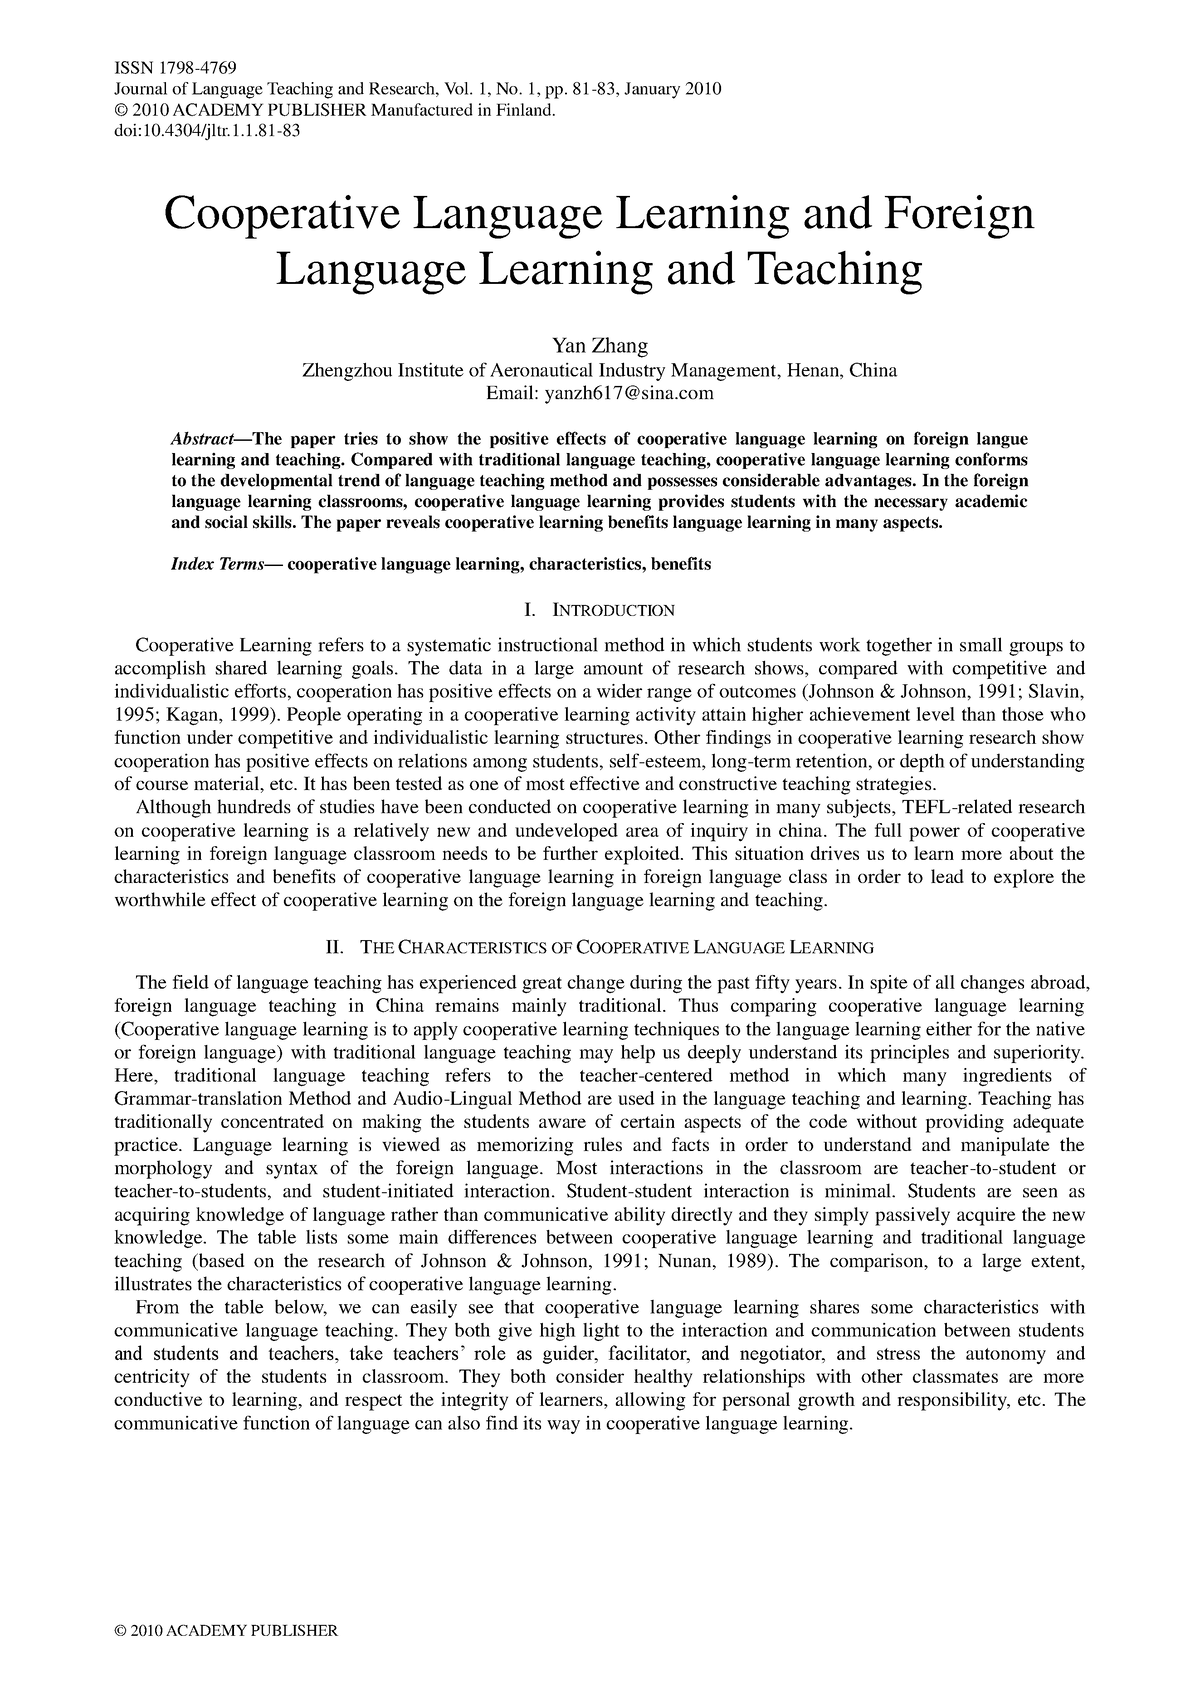 research article on language teaching